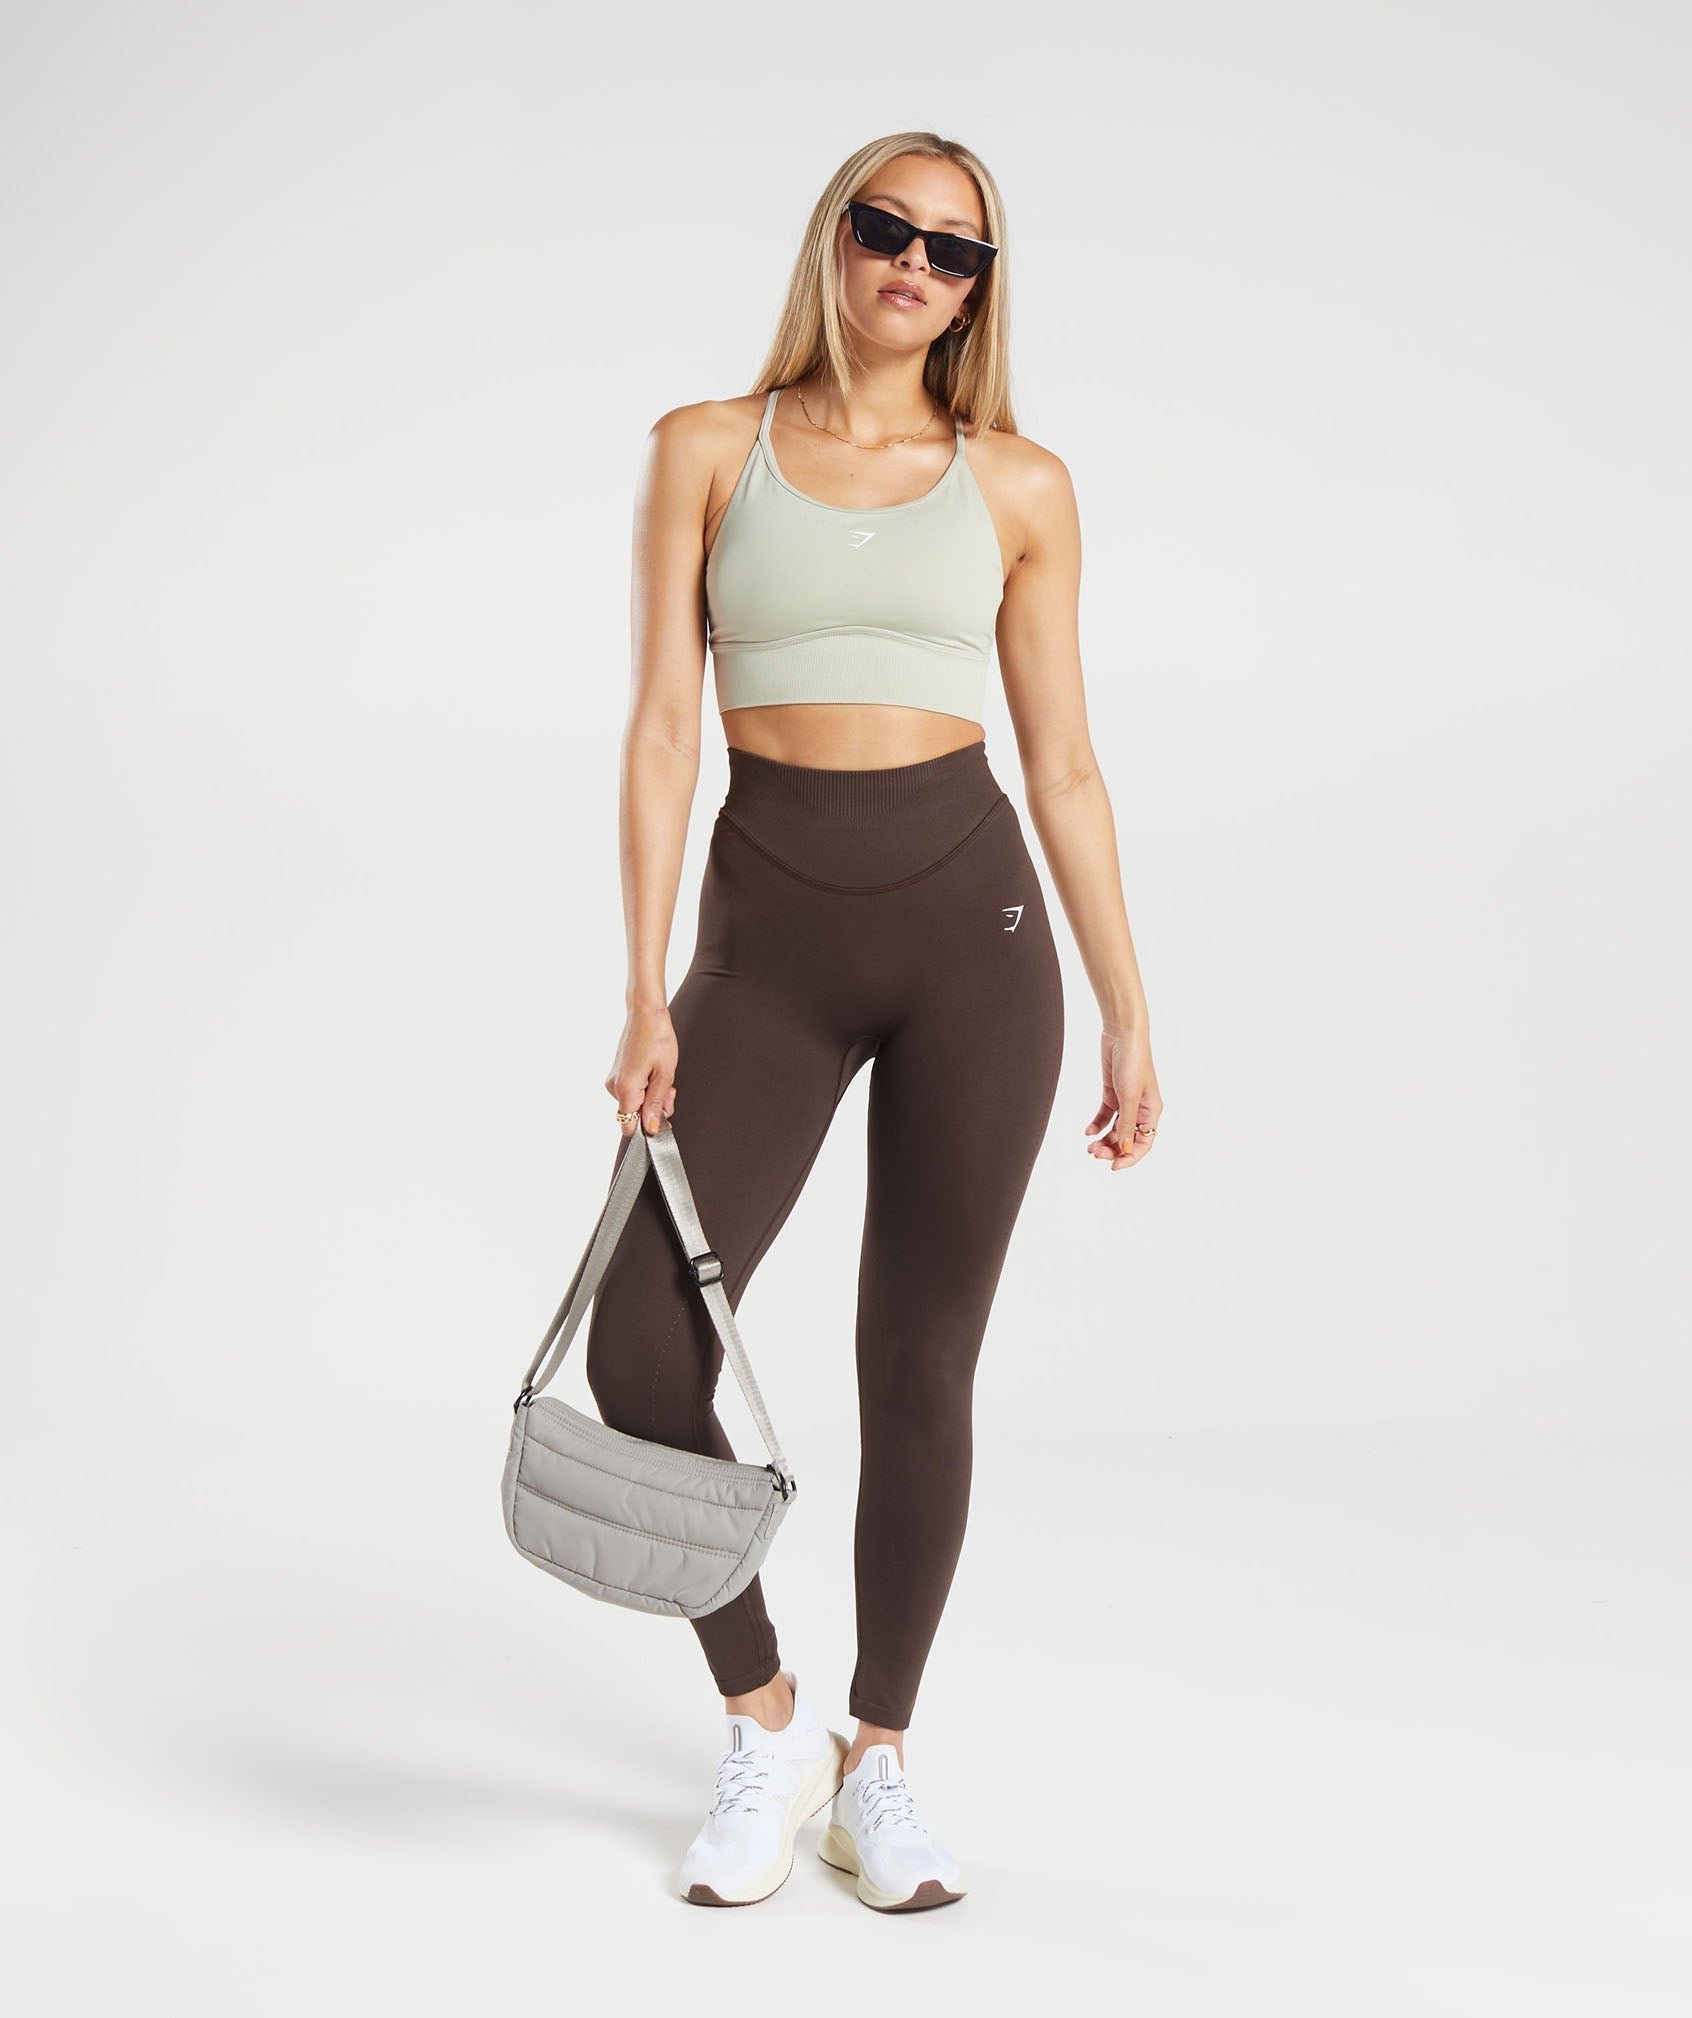 Sweat Seamless Longline Sports Bra in Washed Stone Brown - view 4